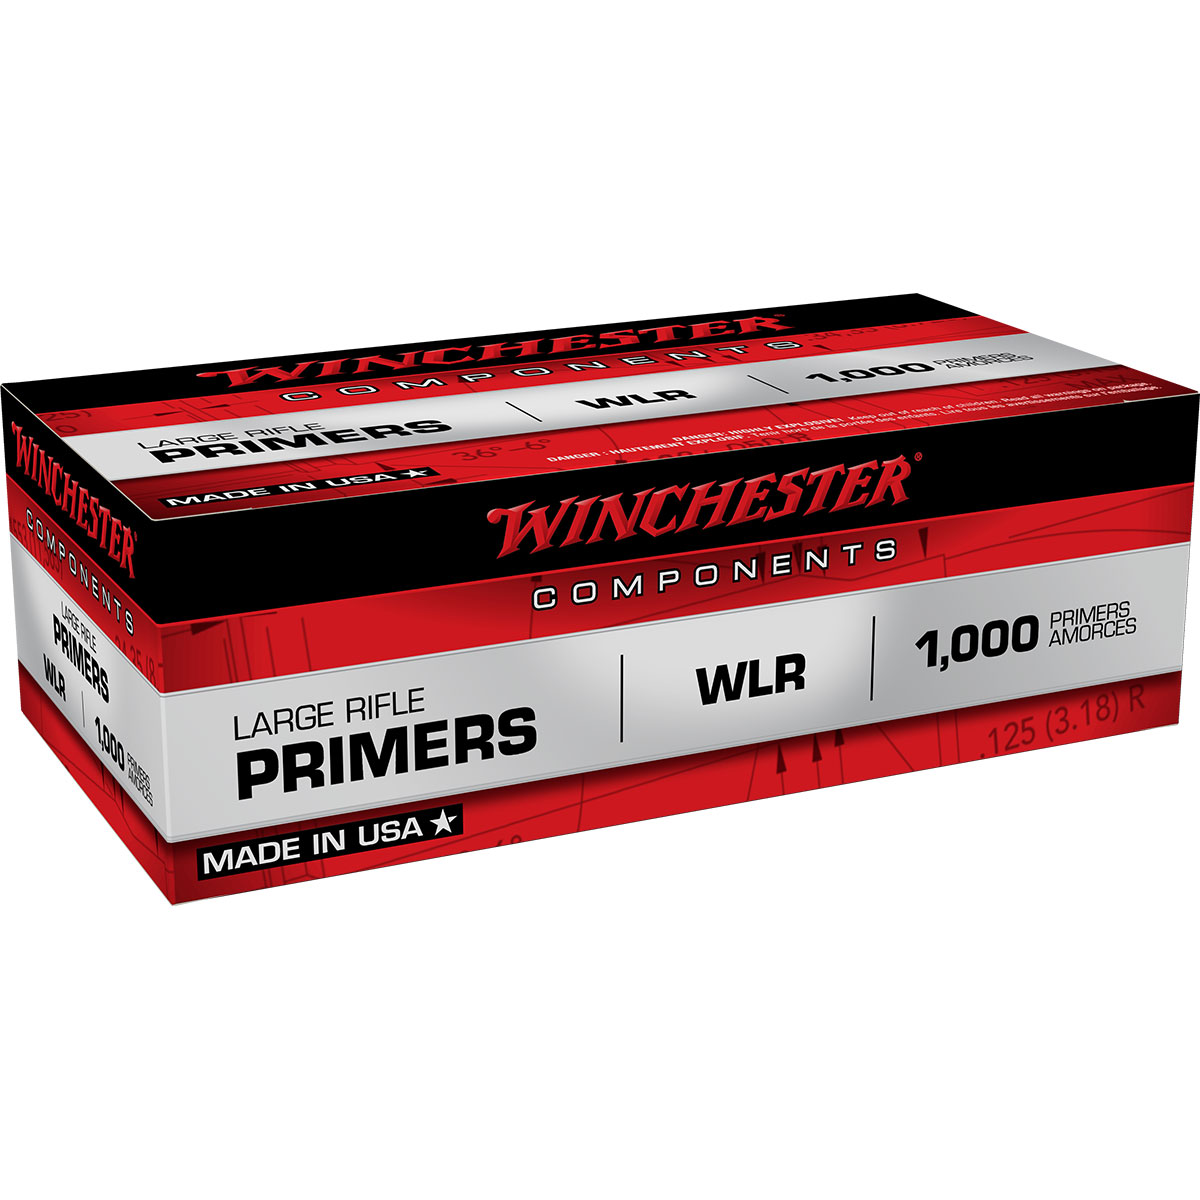 WINCHESTER - LARGE RIFLE PRIMERS